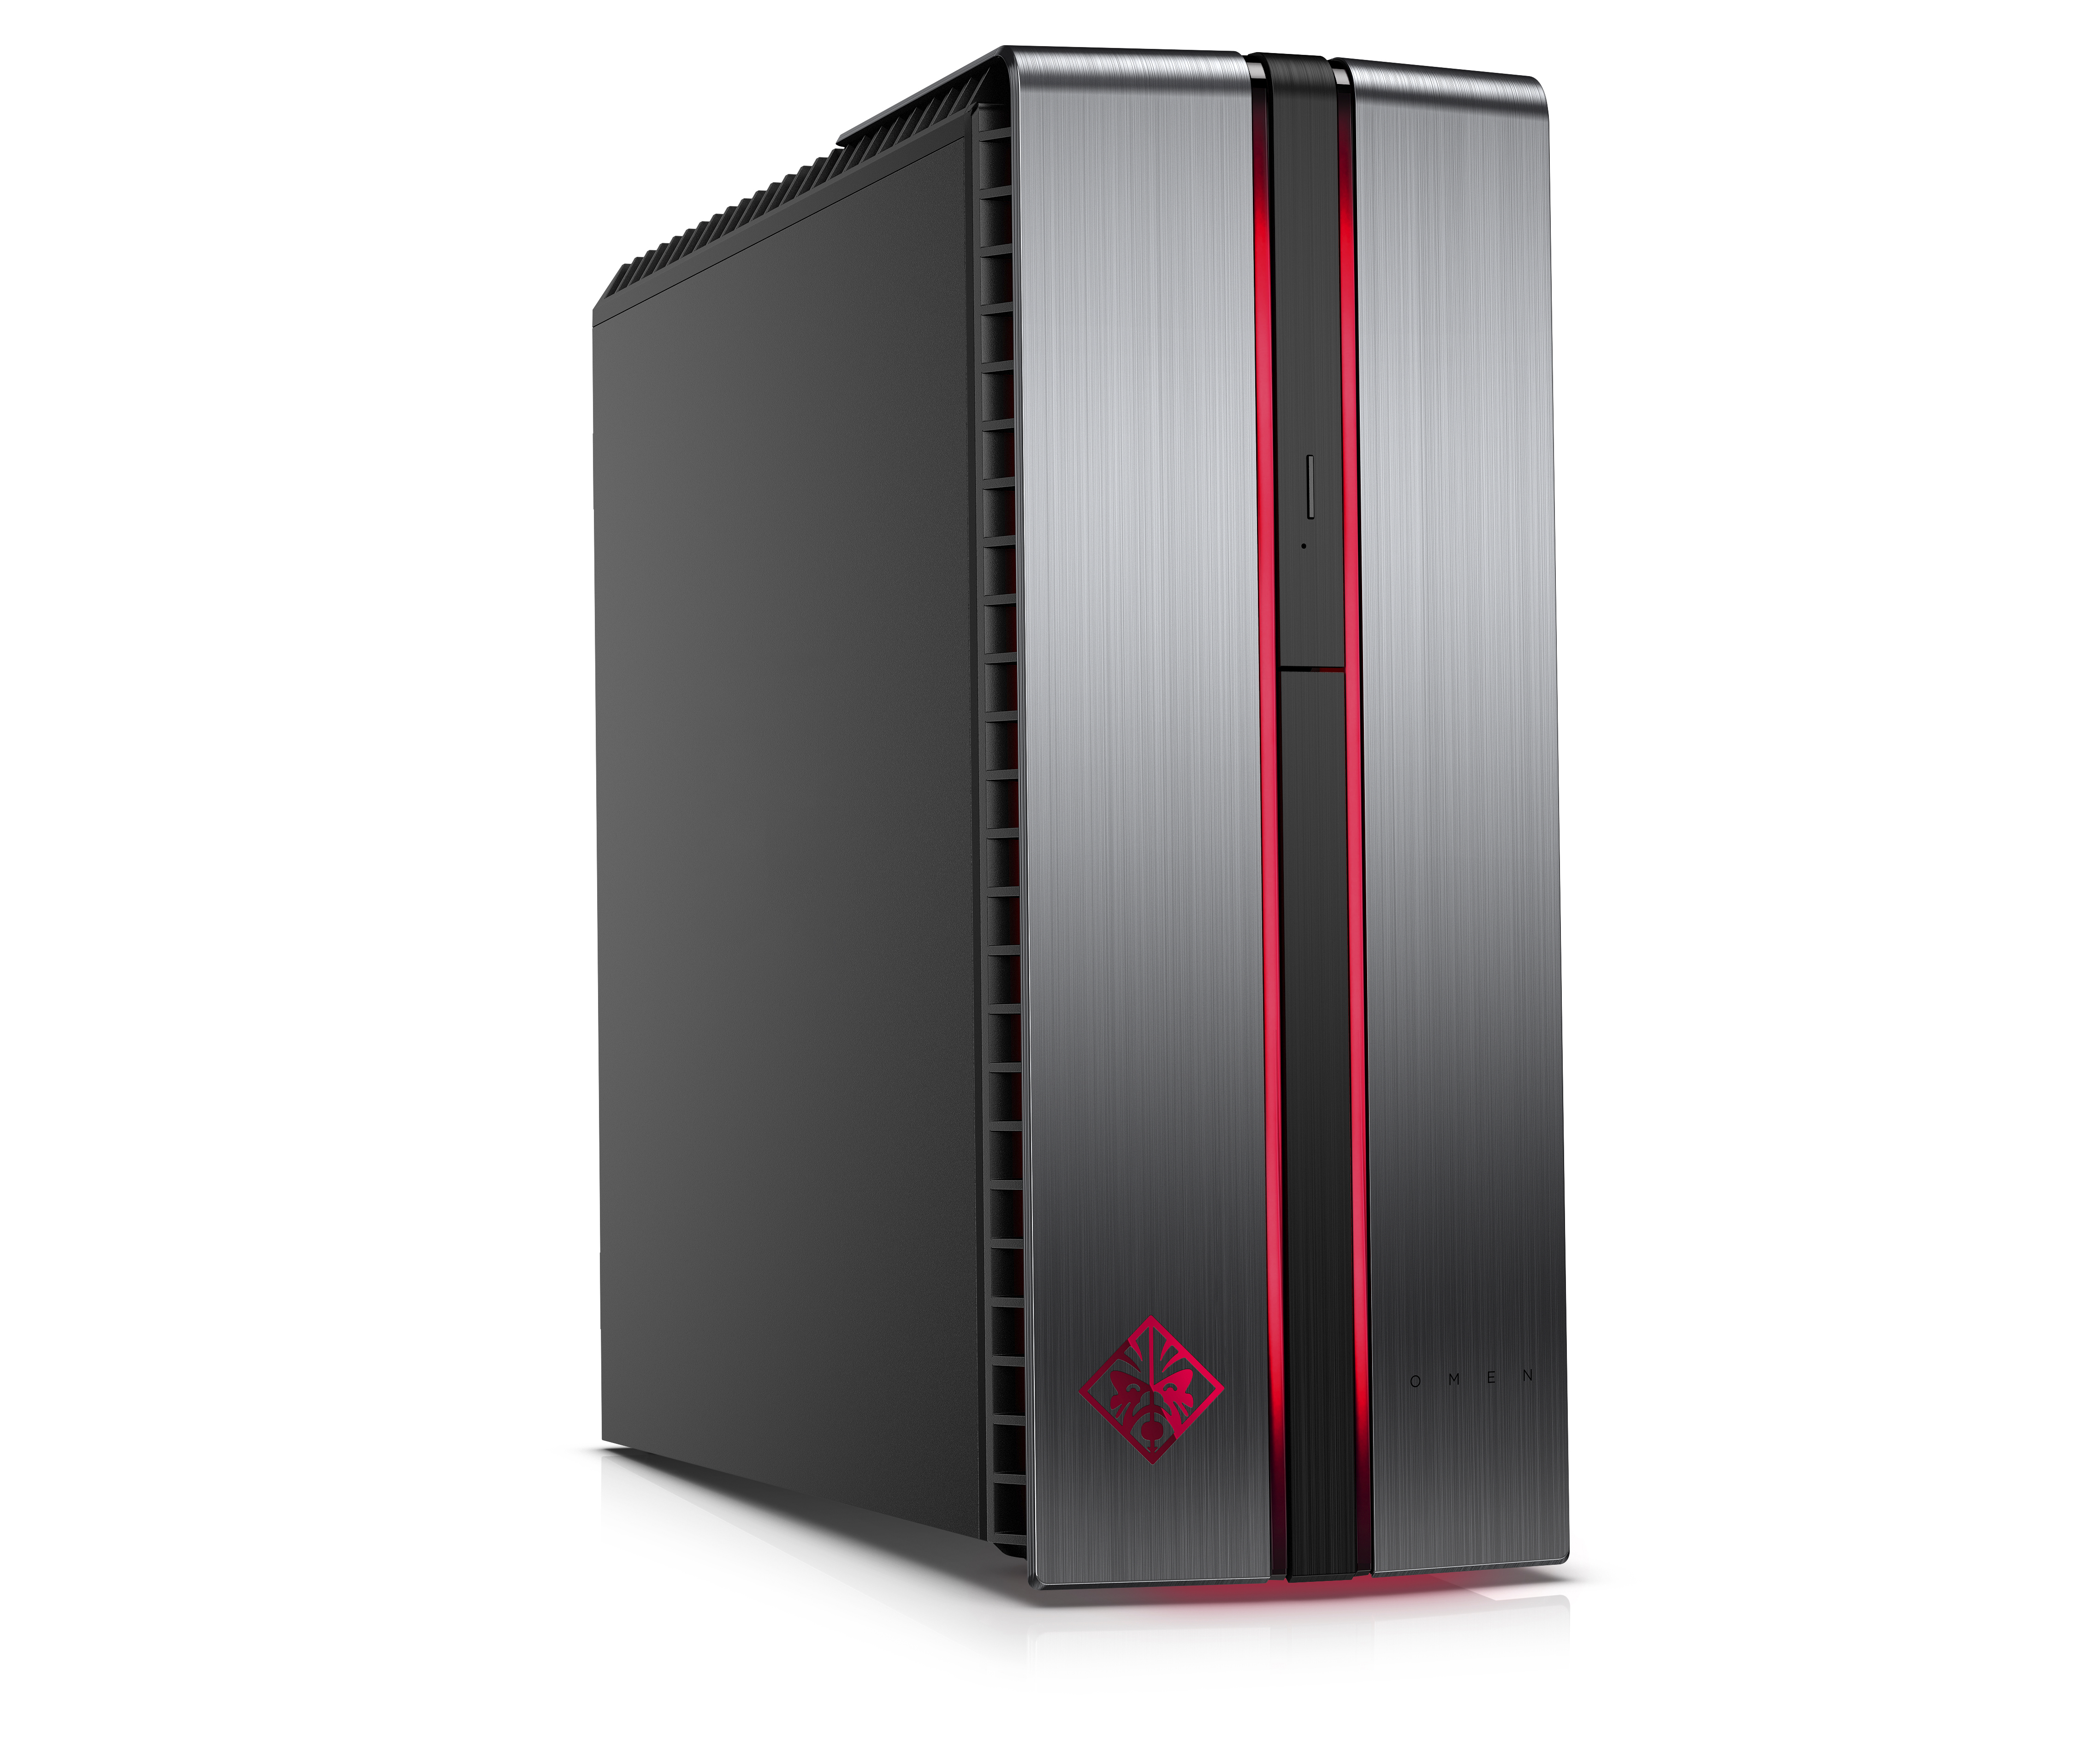 OMEN-by-HP-Desktop-PC-with-Dragon-Red-LED_Right-Facing